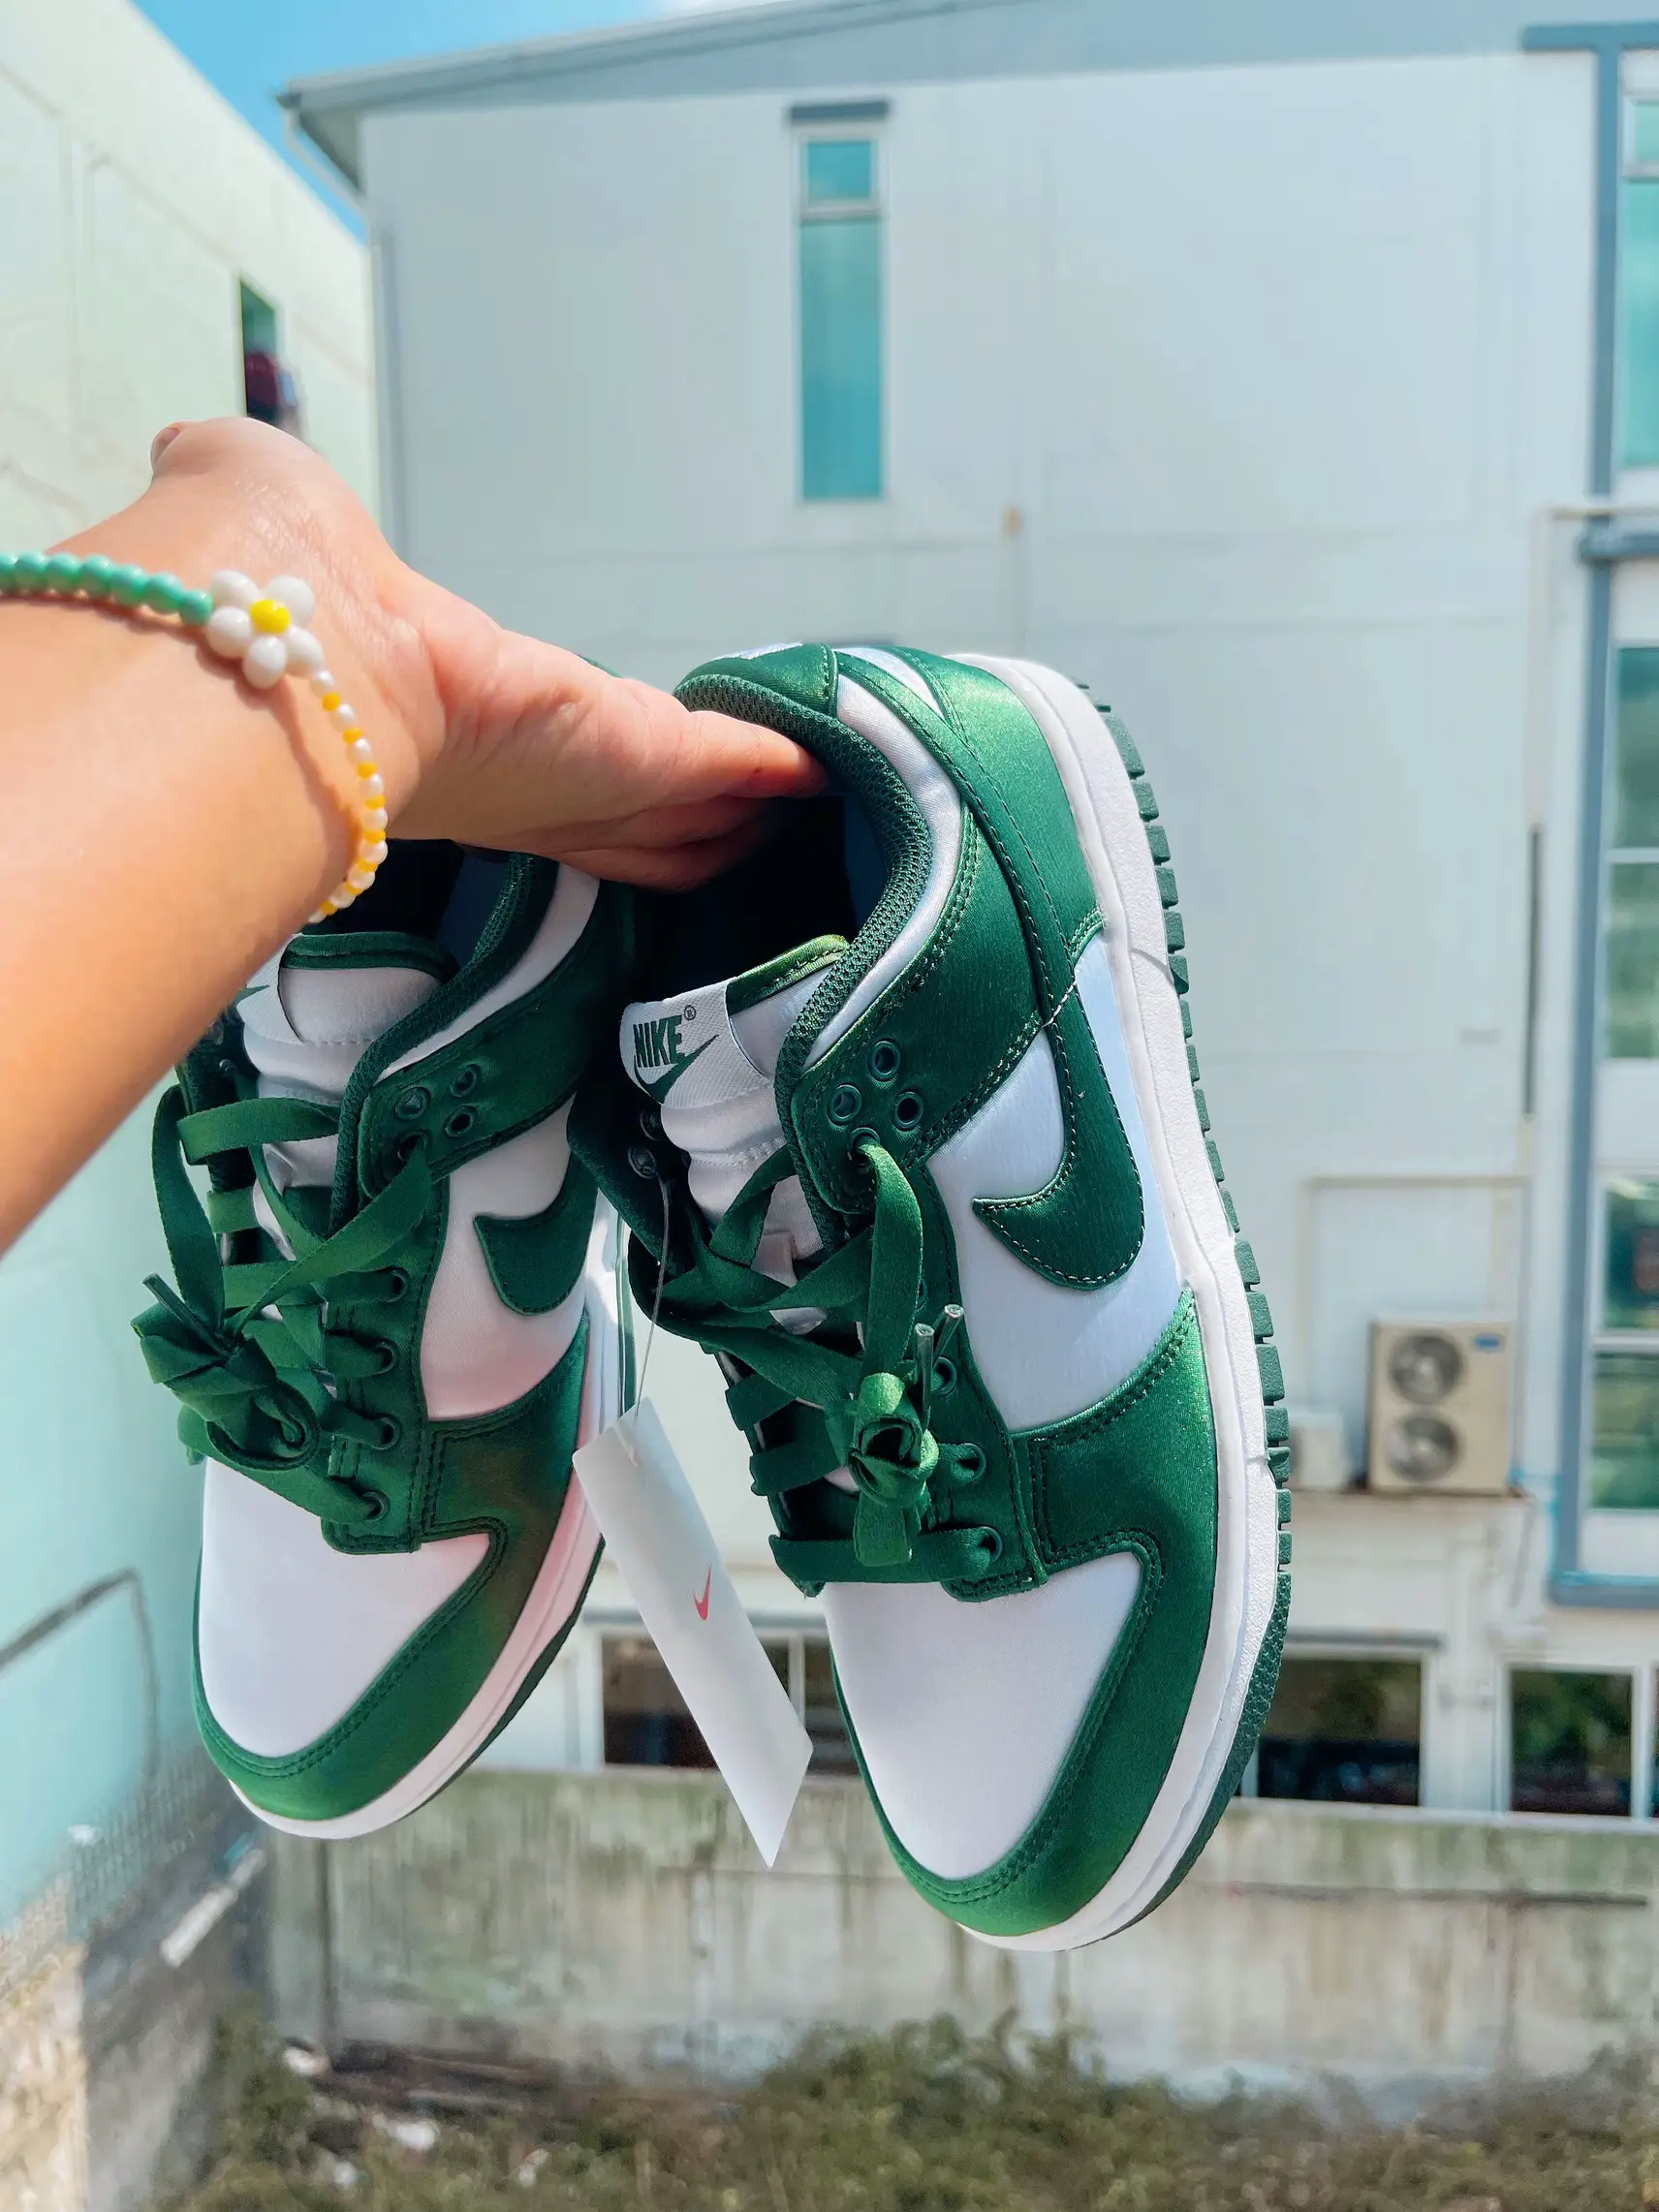 Unboxing Nike Dunk Low Ess SNKR Green Satin | Gallery posted by